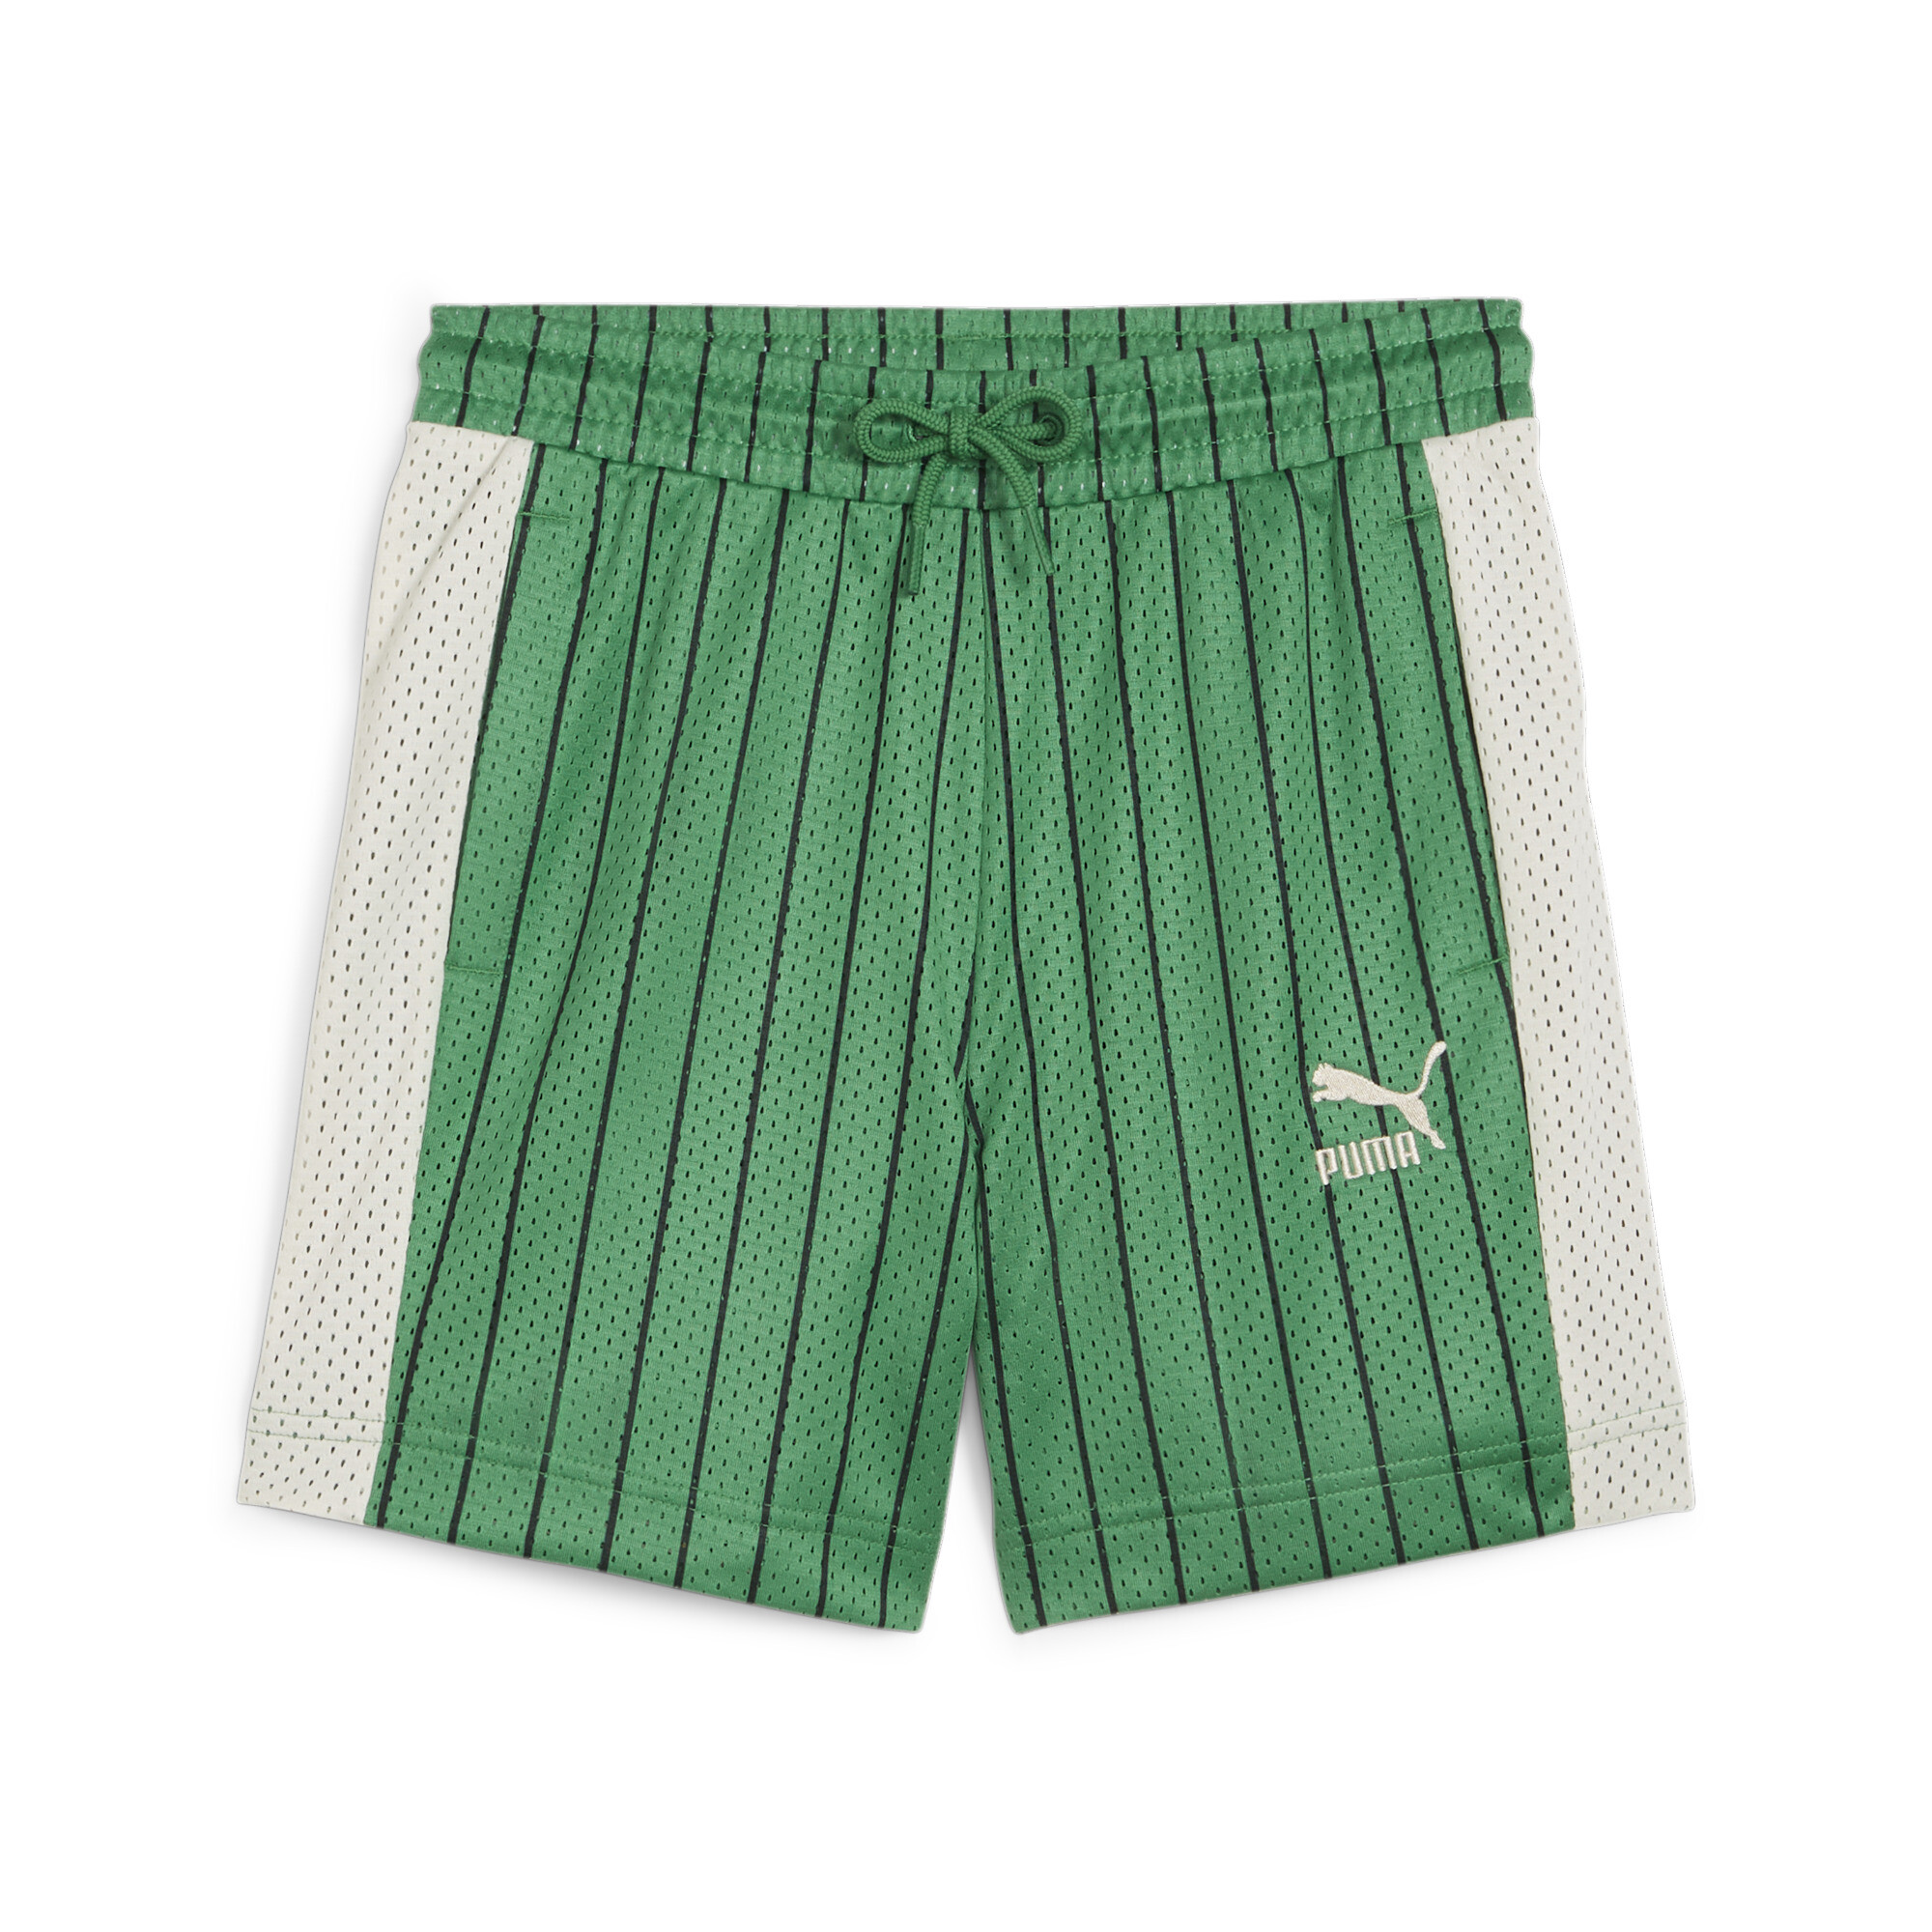 PUMA For The Fanbase Basketball Shorts In Green, Size 15-16 Youth